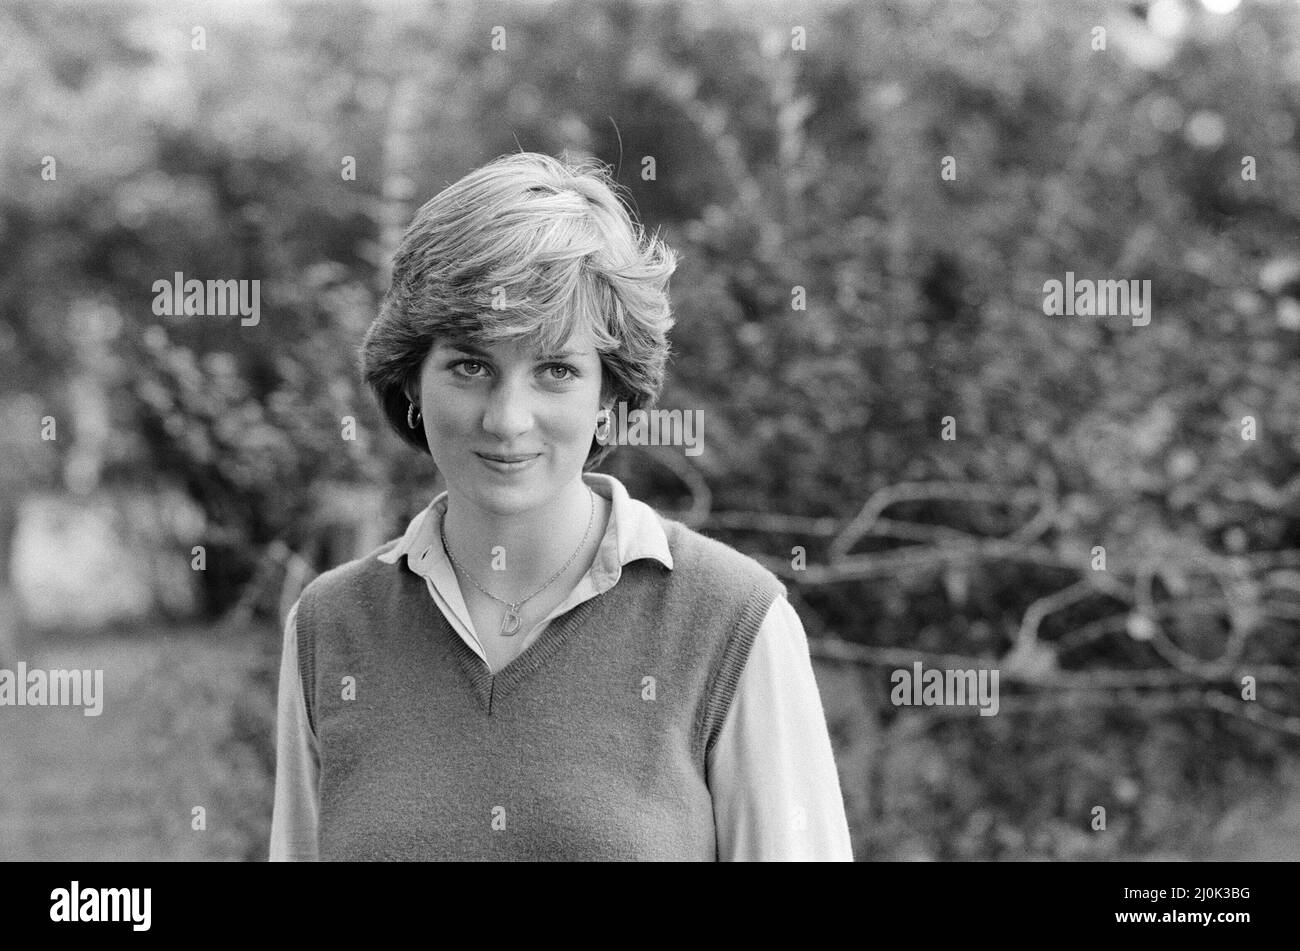 Lady Diana Spencer, later to become Princess Diana, HRH Princess of Wales pictured at the kindergarten at St. George's Square, Pimlico, London, where she works as a teacher.  Picture taken 18th September 1980. Stock Photo